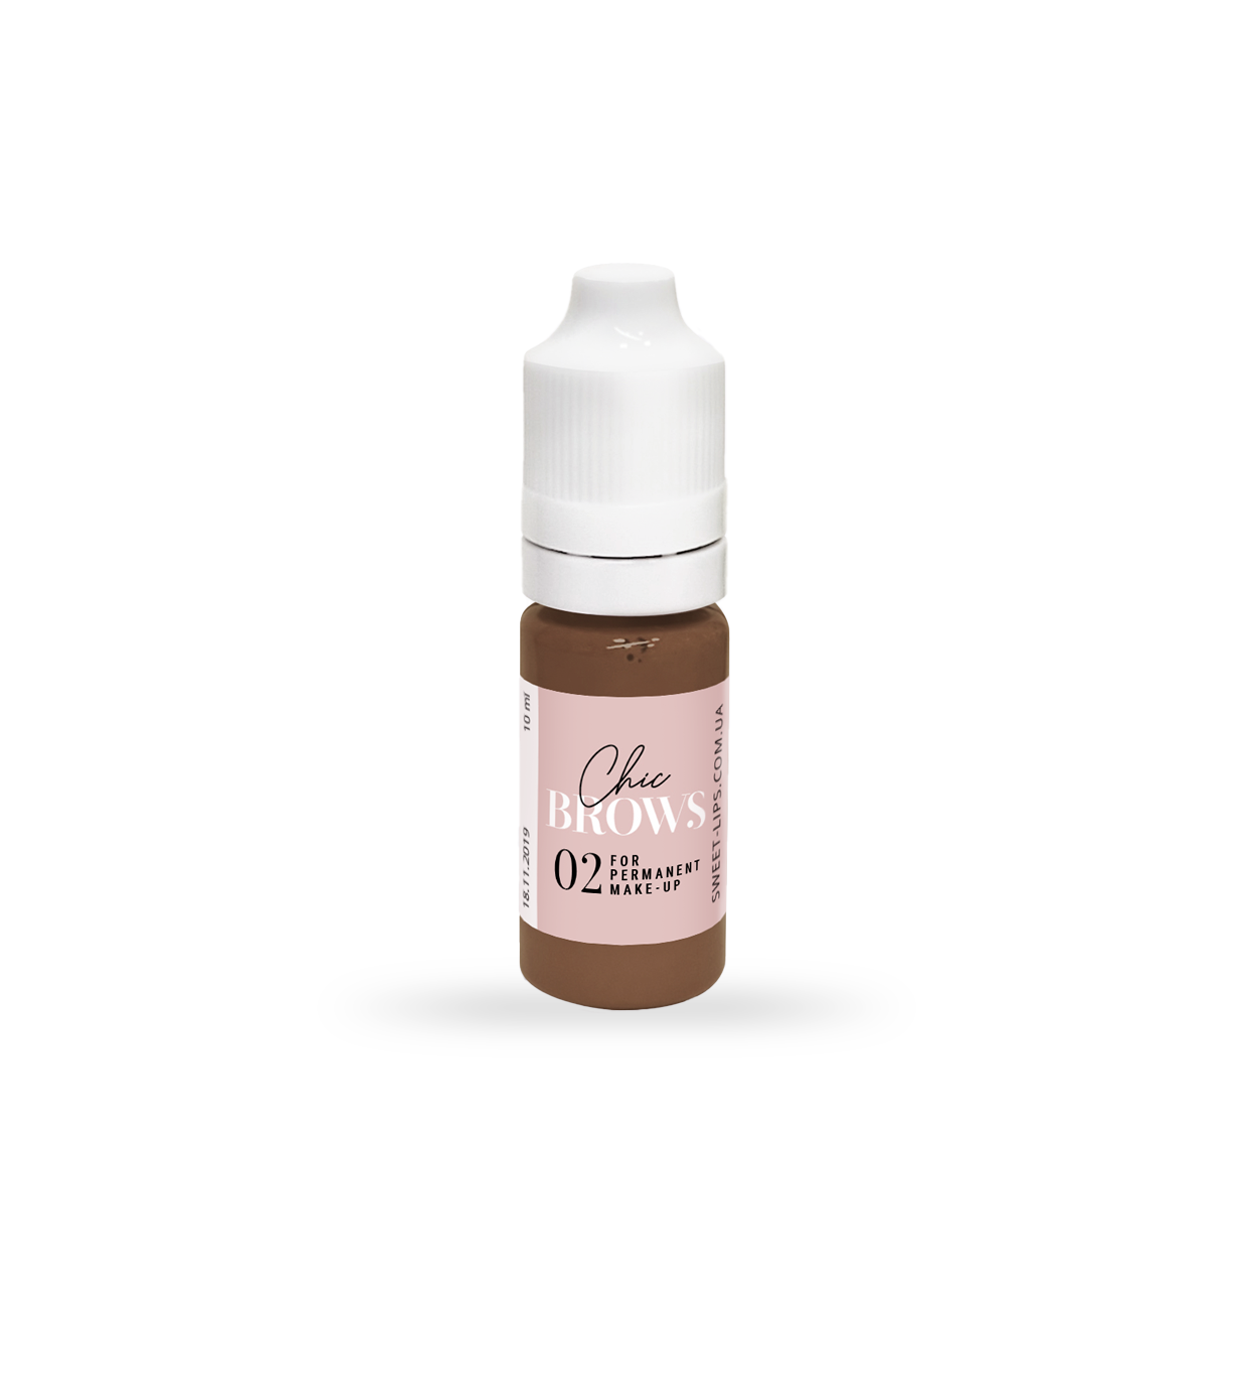 Chic Brows No.2 5ml